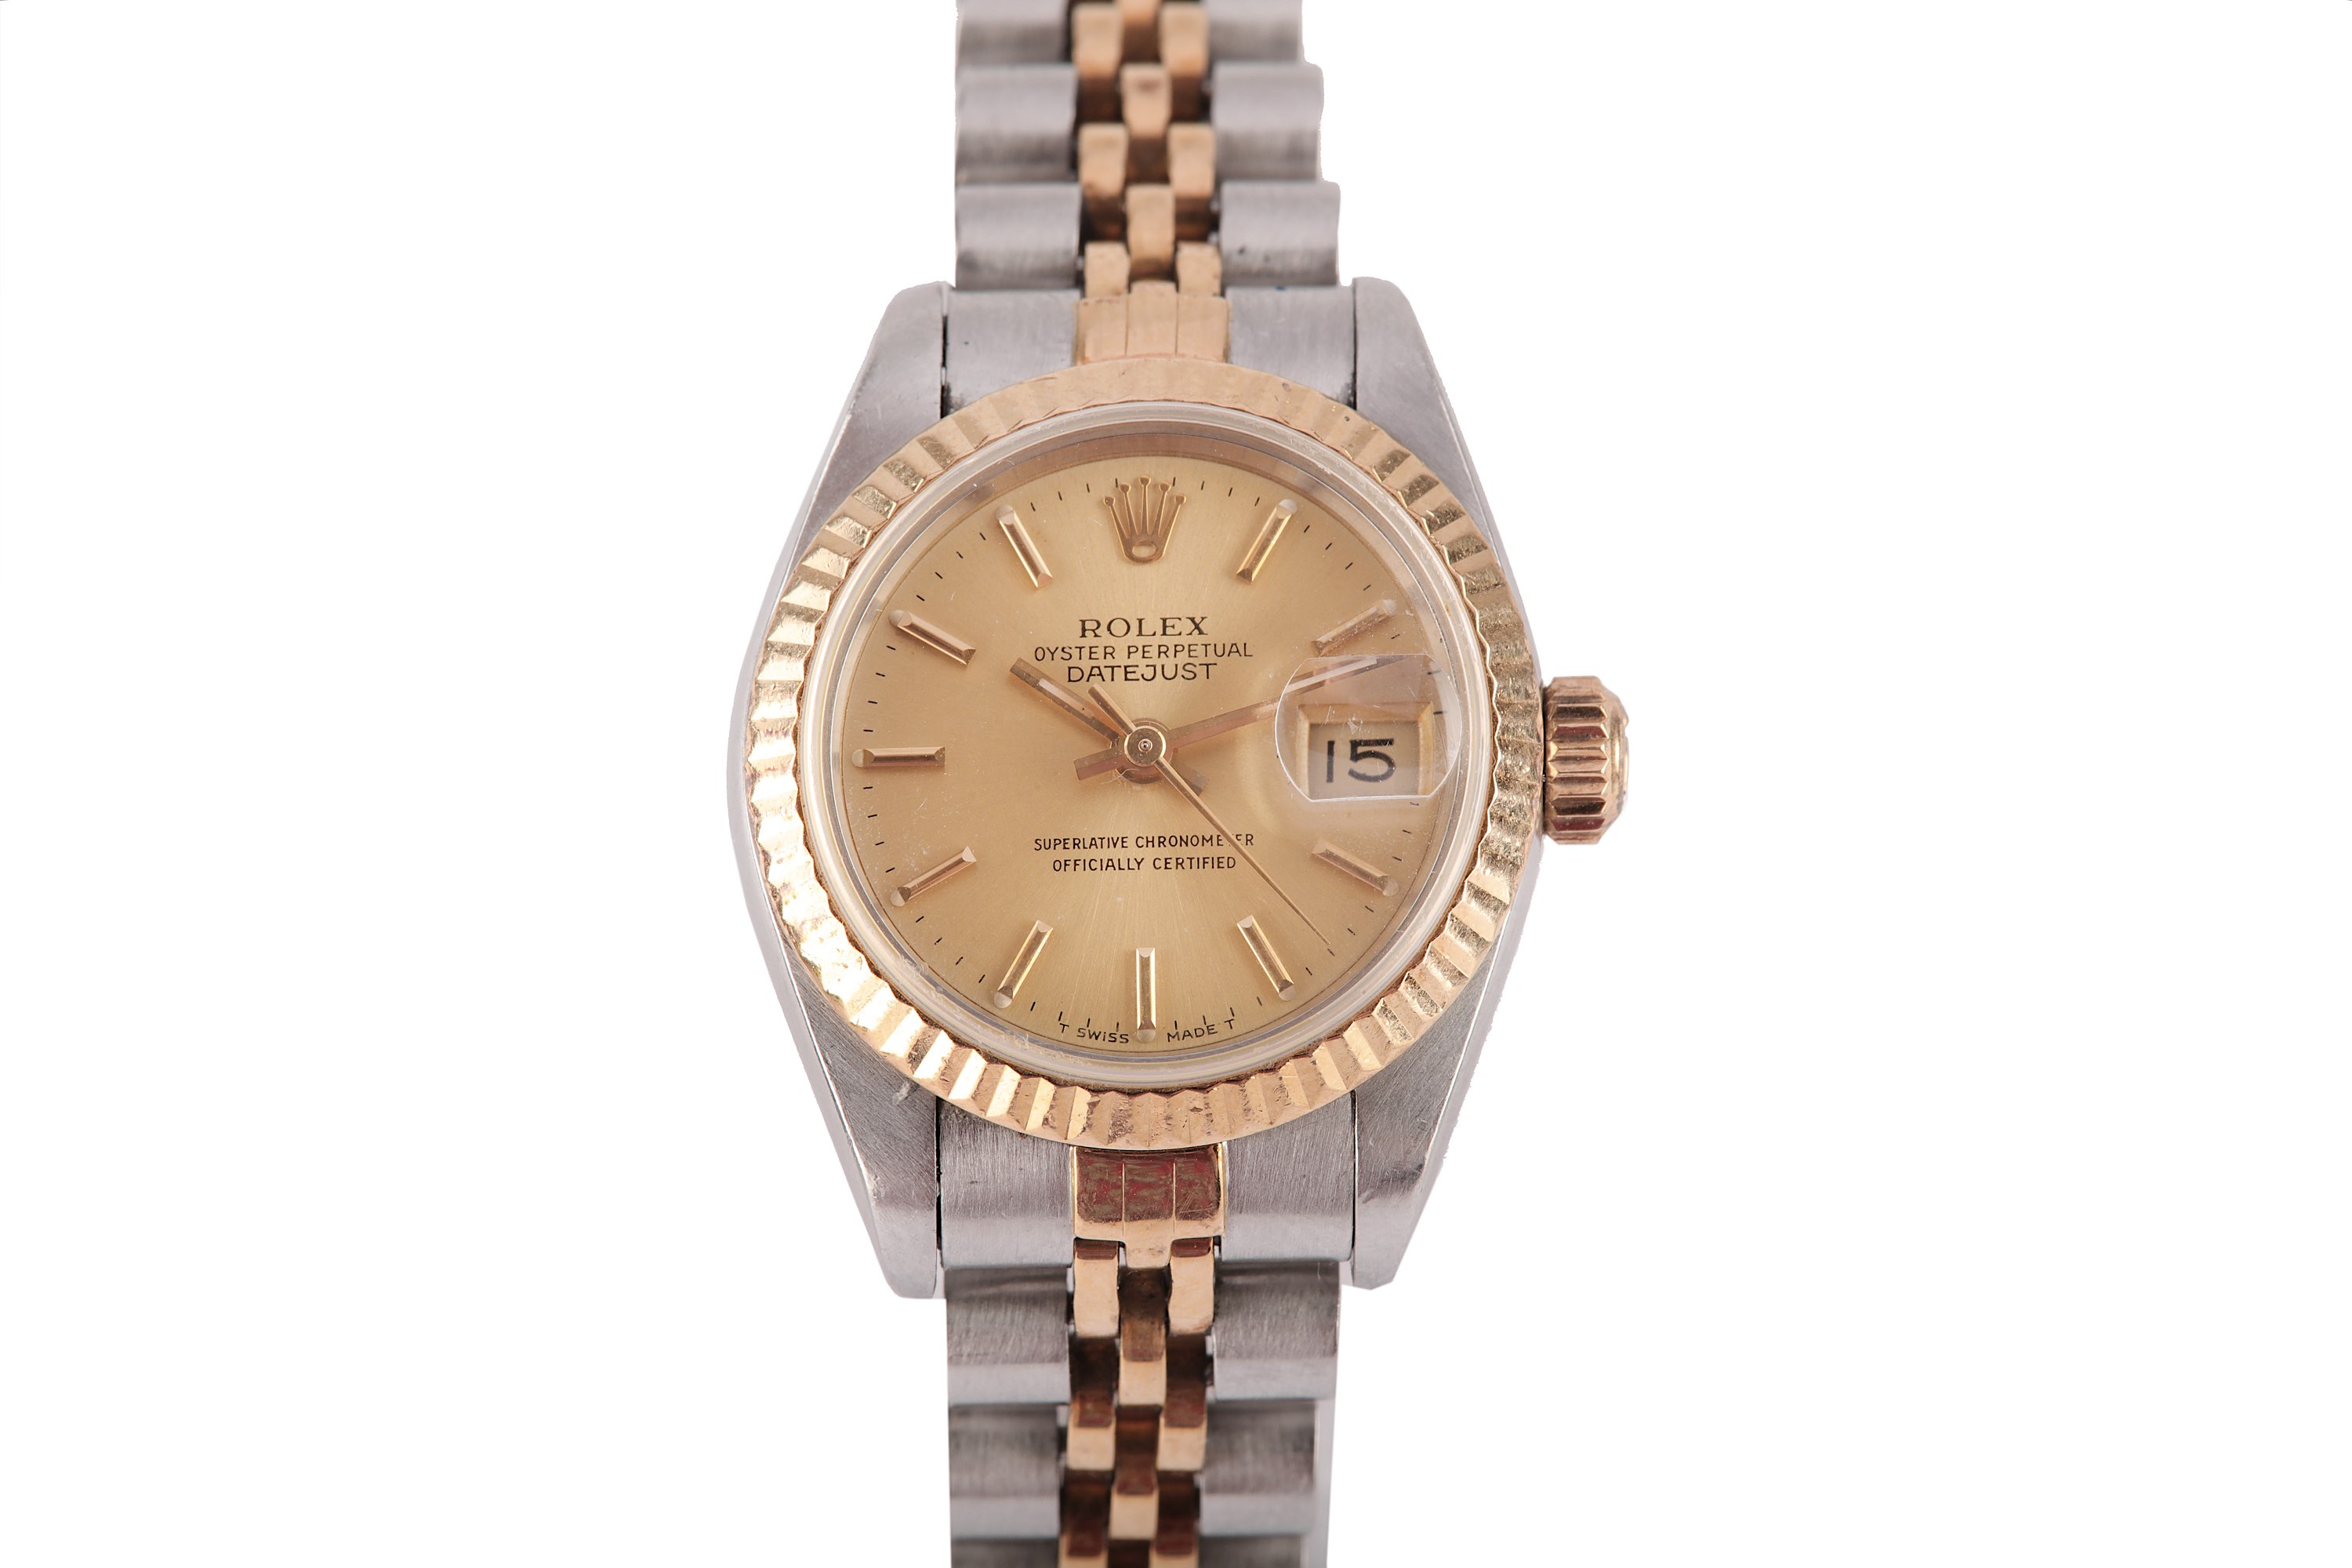 ROLEX. A LADIES STAINLESS STEEL AND 18 K GOLD AUTOMATIC CALENDAR BRACELET WATCH. Maker: Rolex. - Image 2 of 5